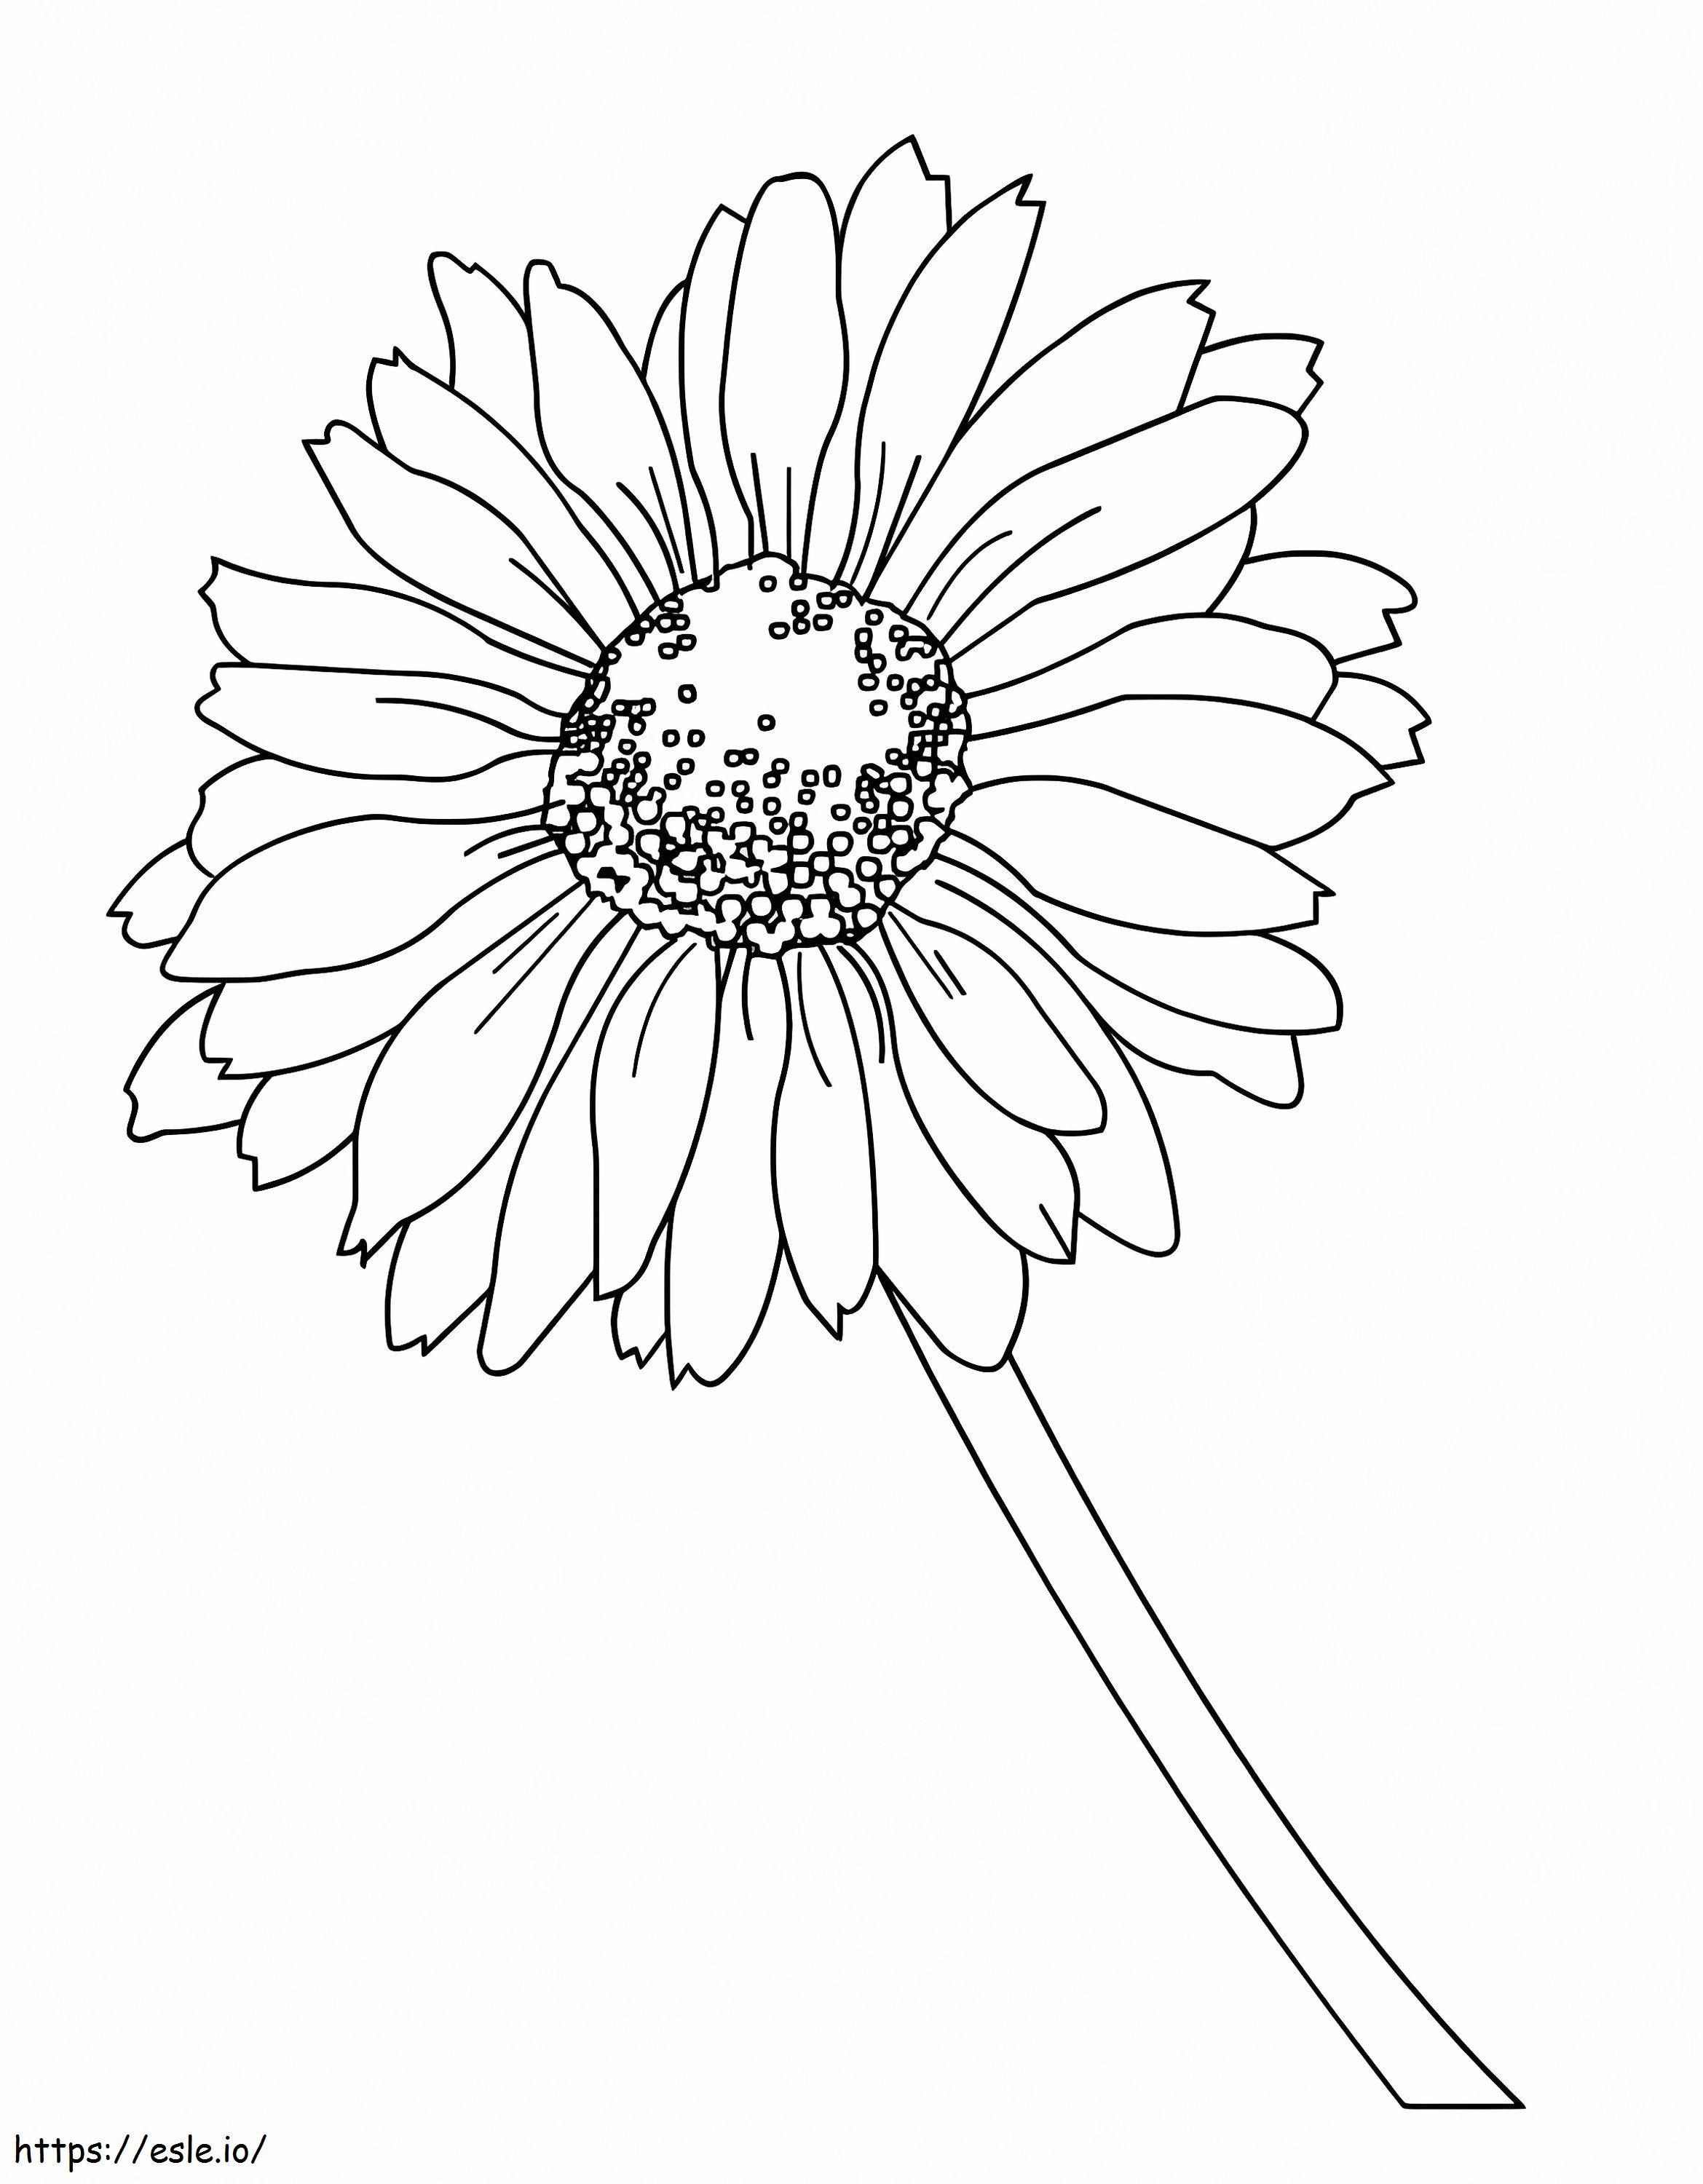 A Margarite coloring page